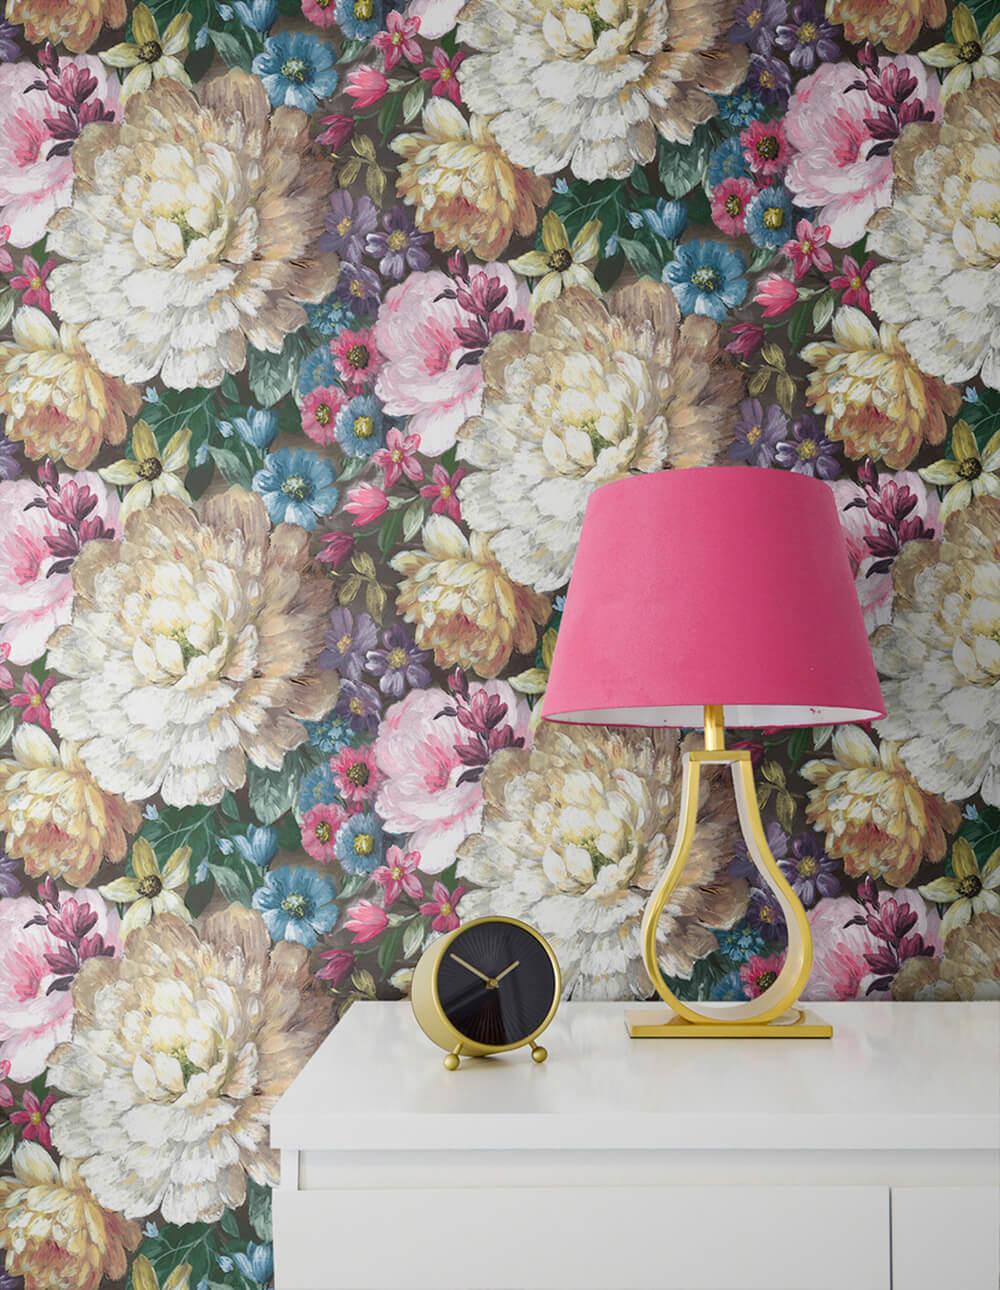 NextWall Blooming Floral Peel & Stick Wallpaper - Multicolored